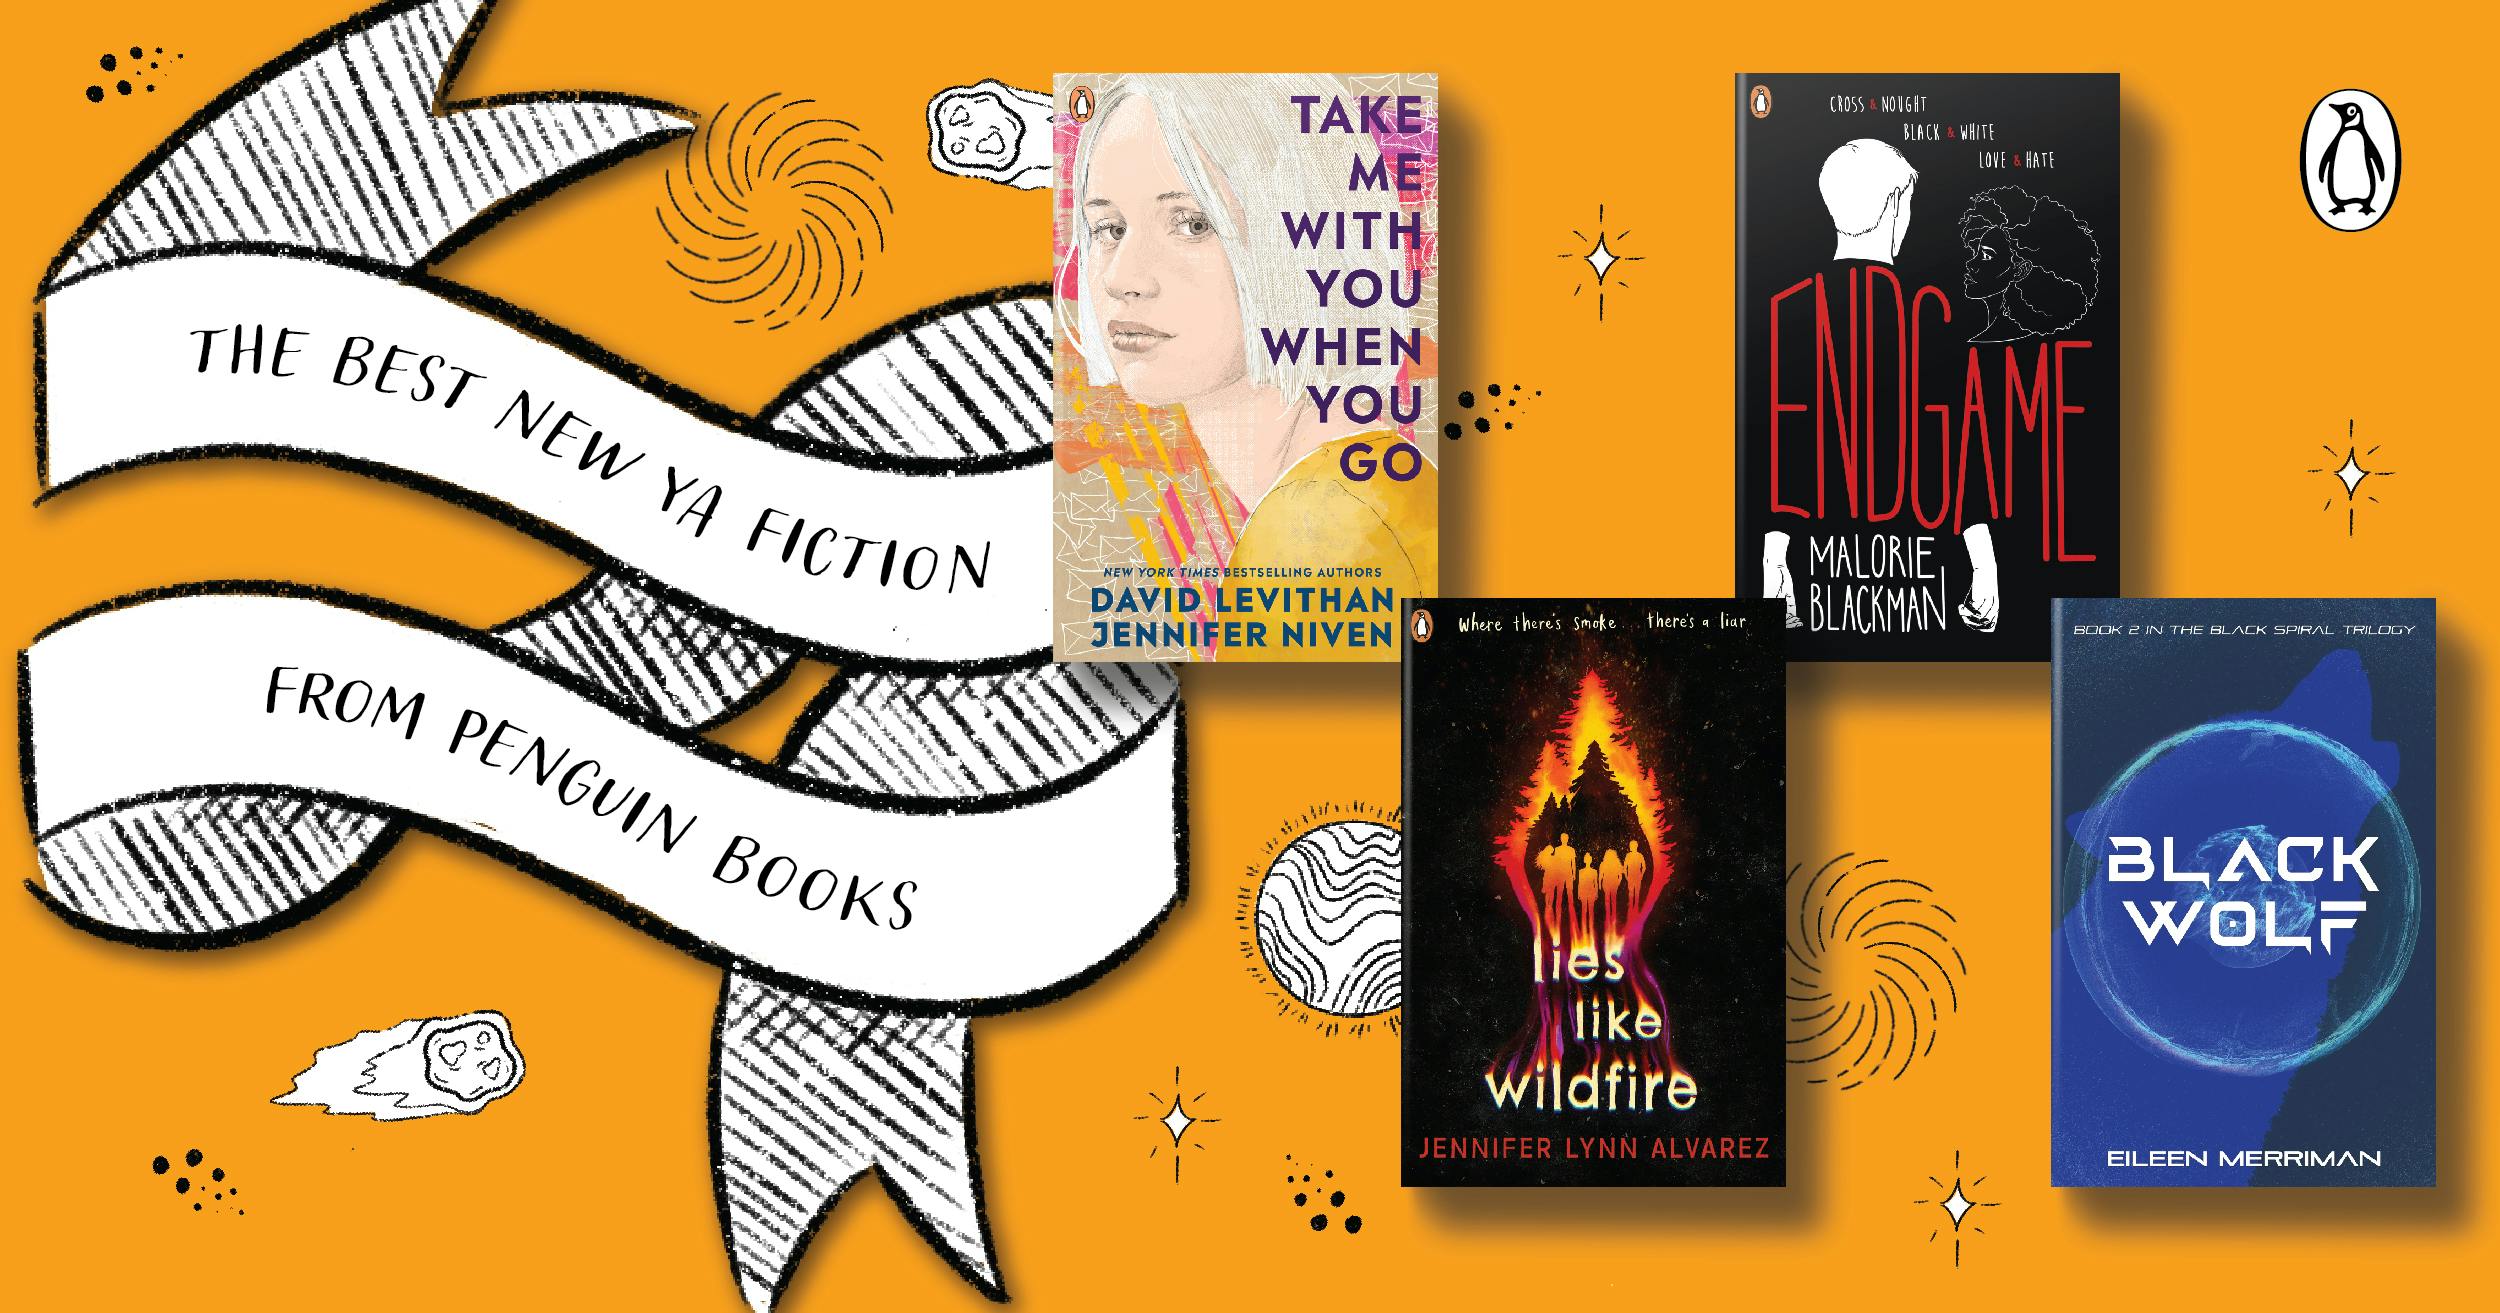 4 epic new YA reads from Penguin Books